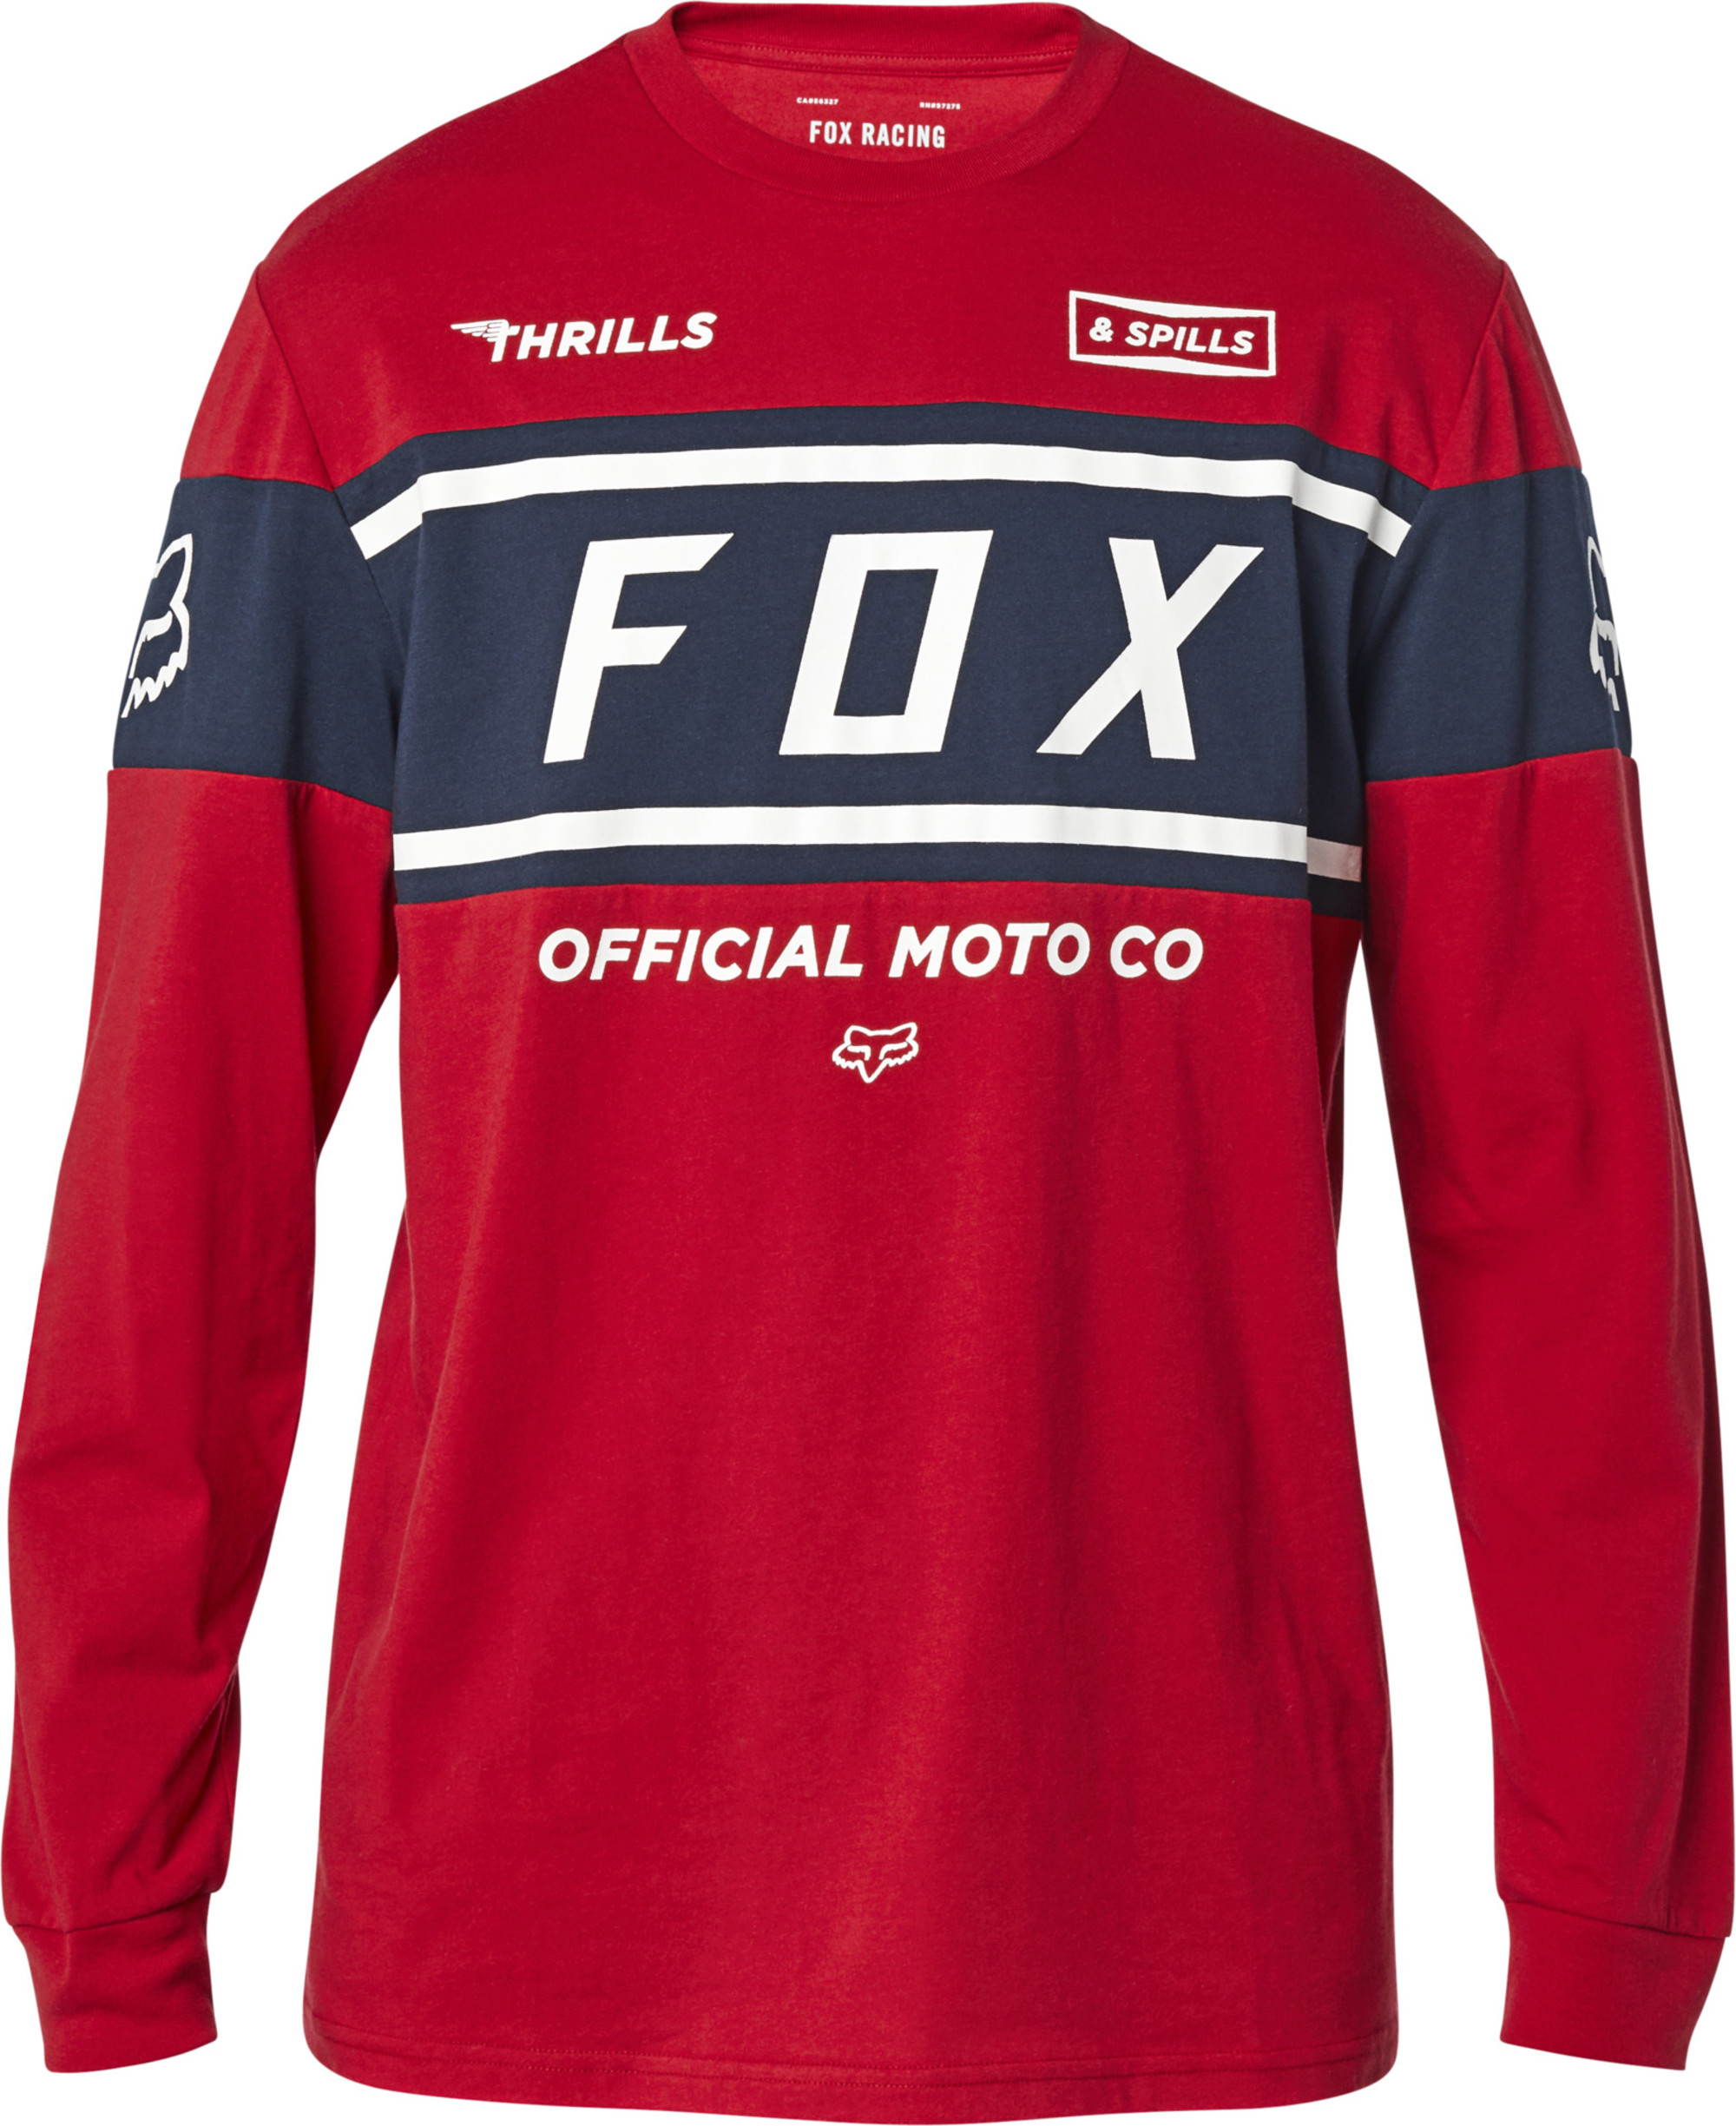 fox racing long sleeve shirts for men official top